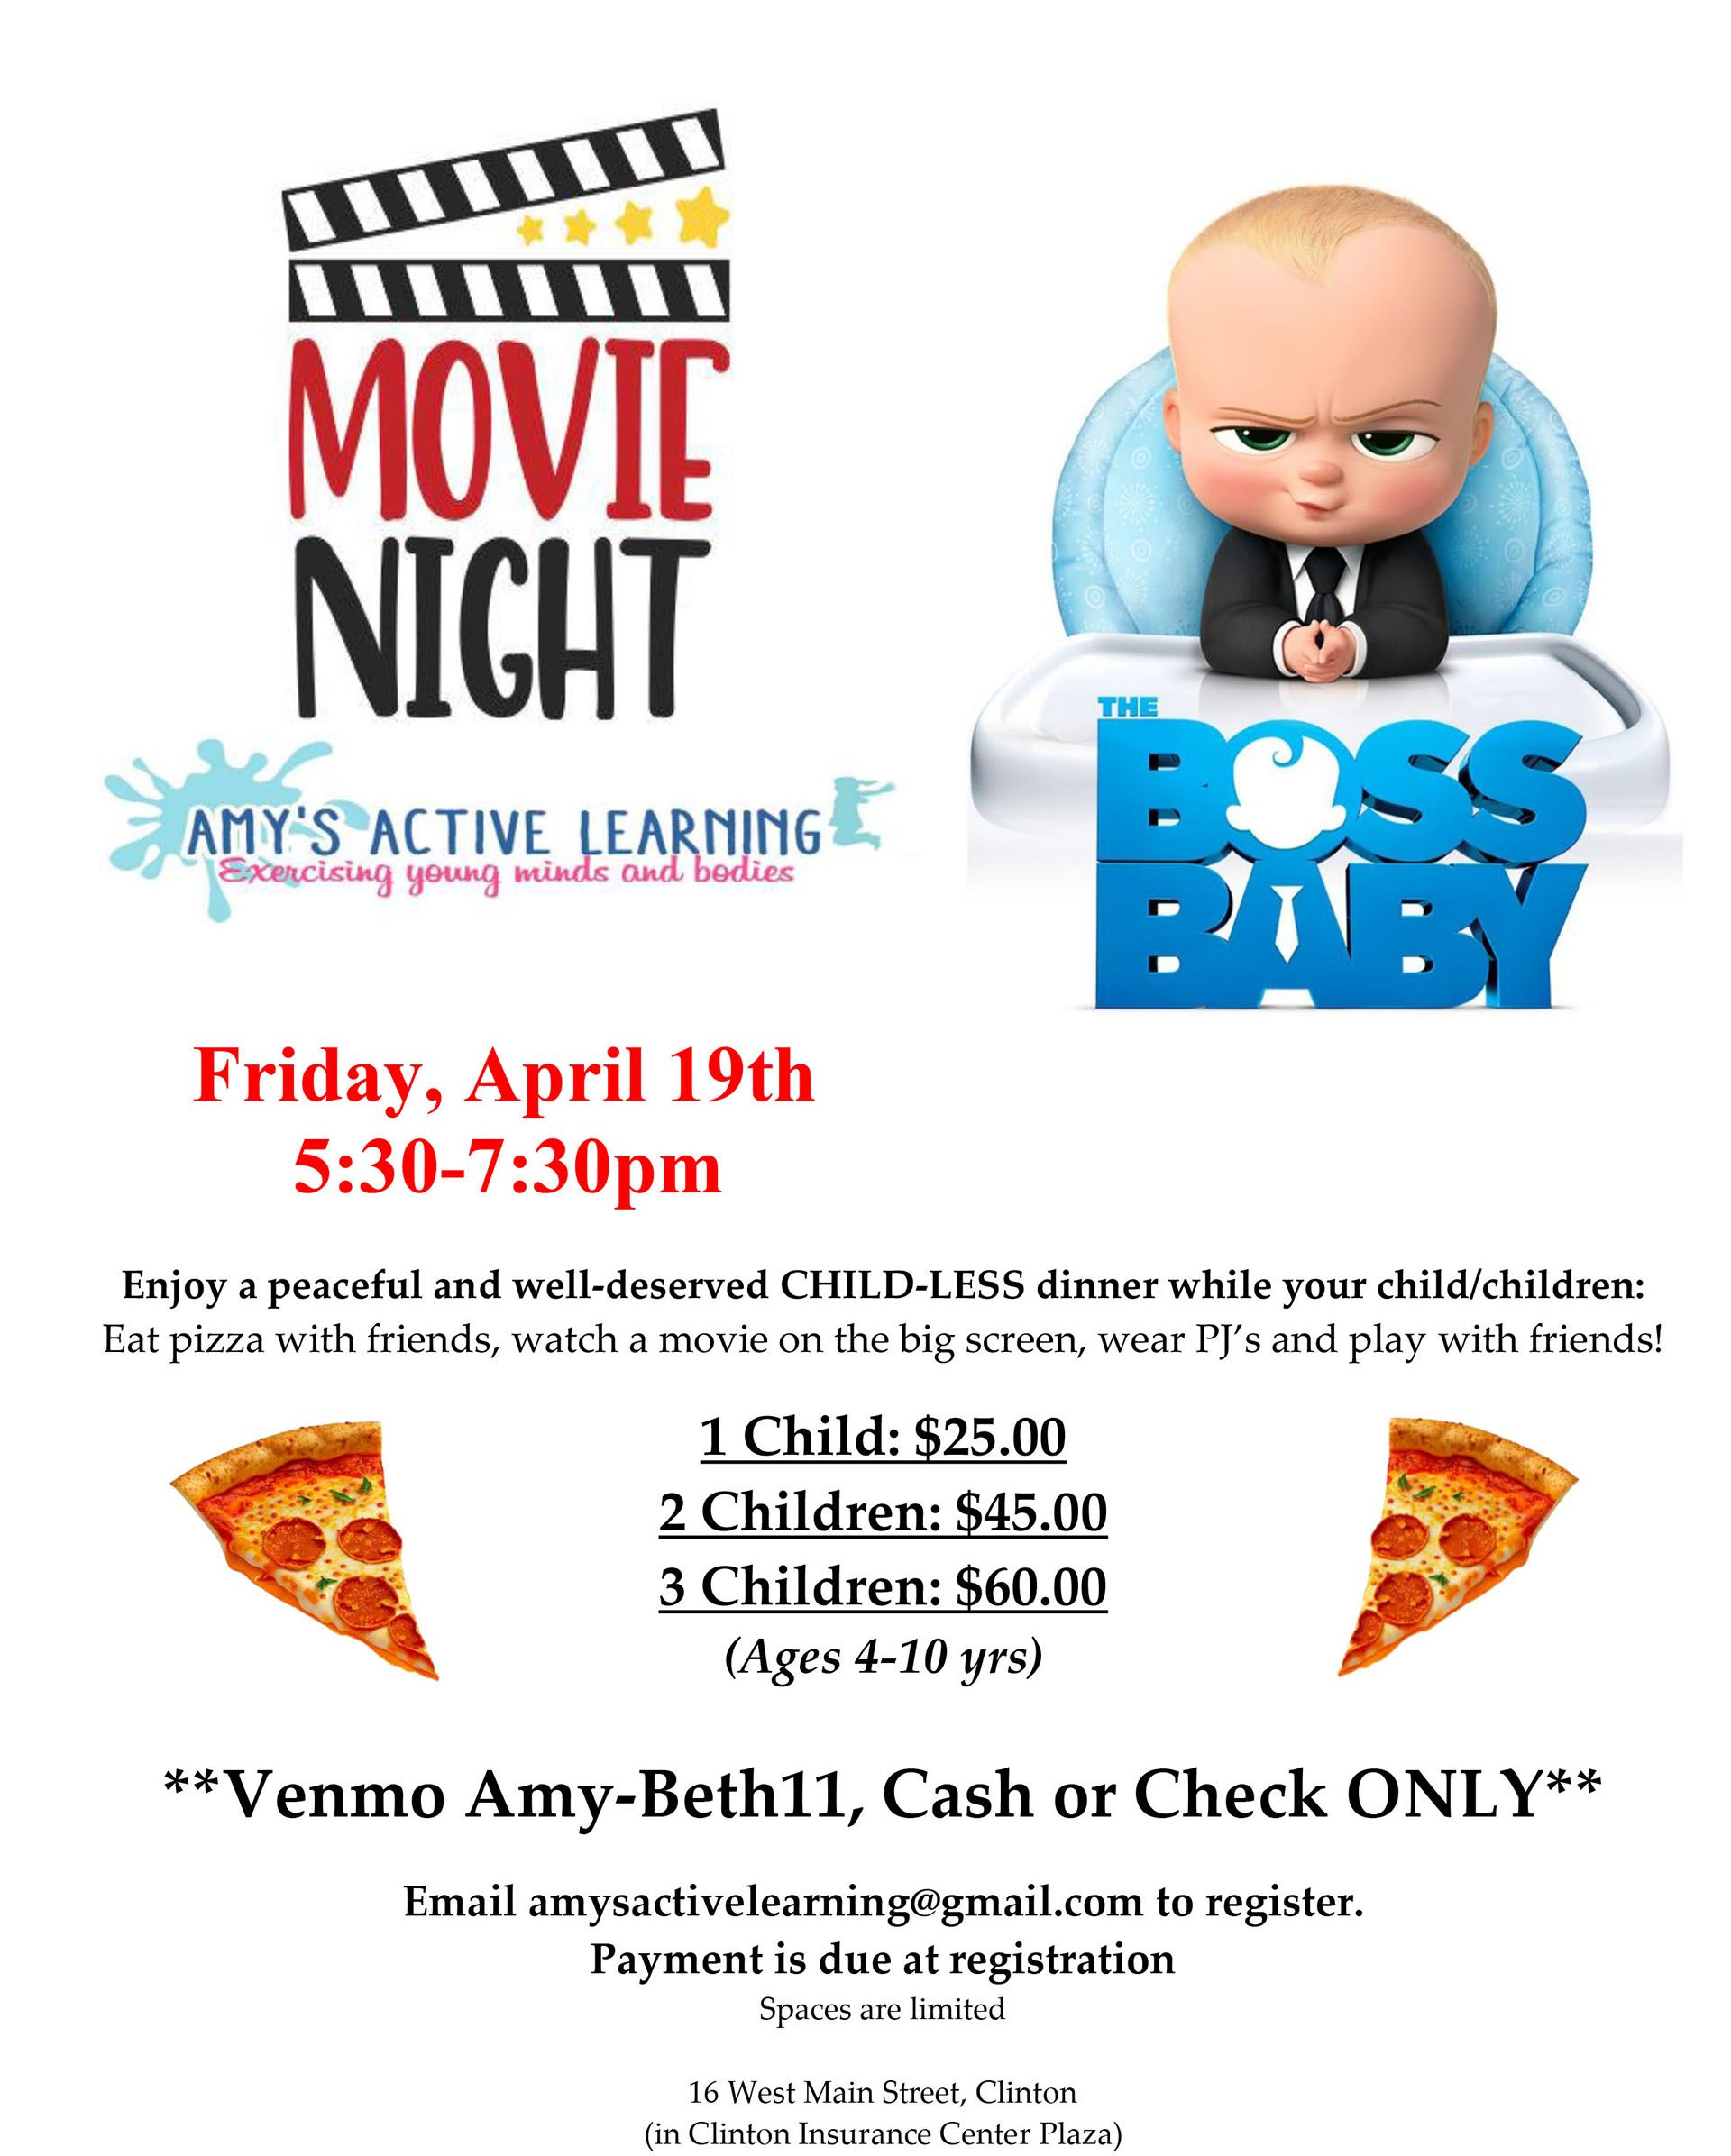 A poster for a movie night with a baby in a high chair and pizza slices